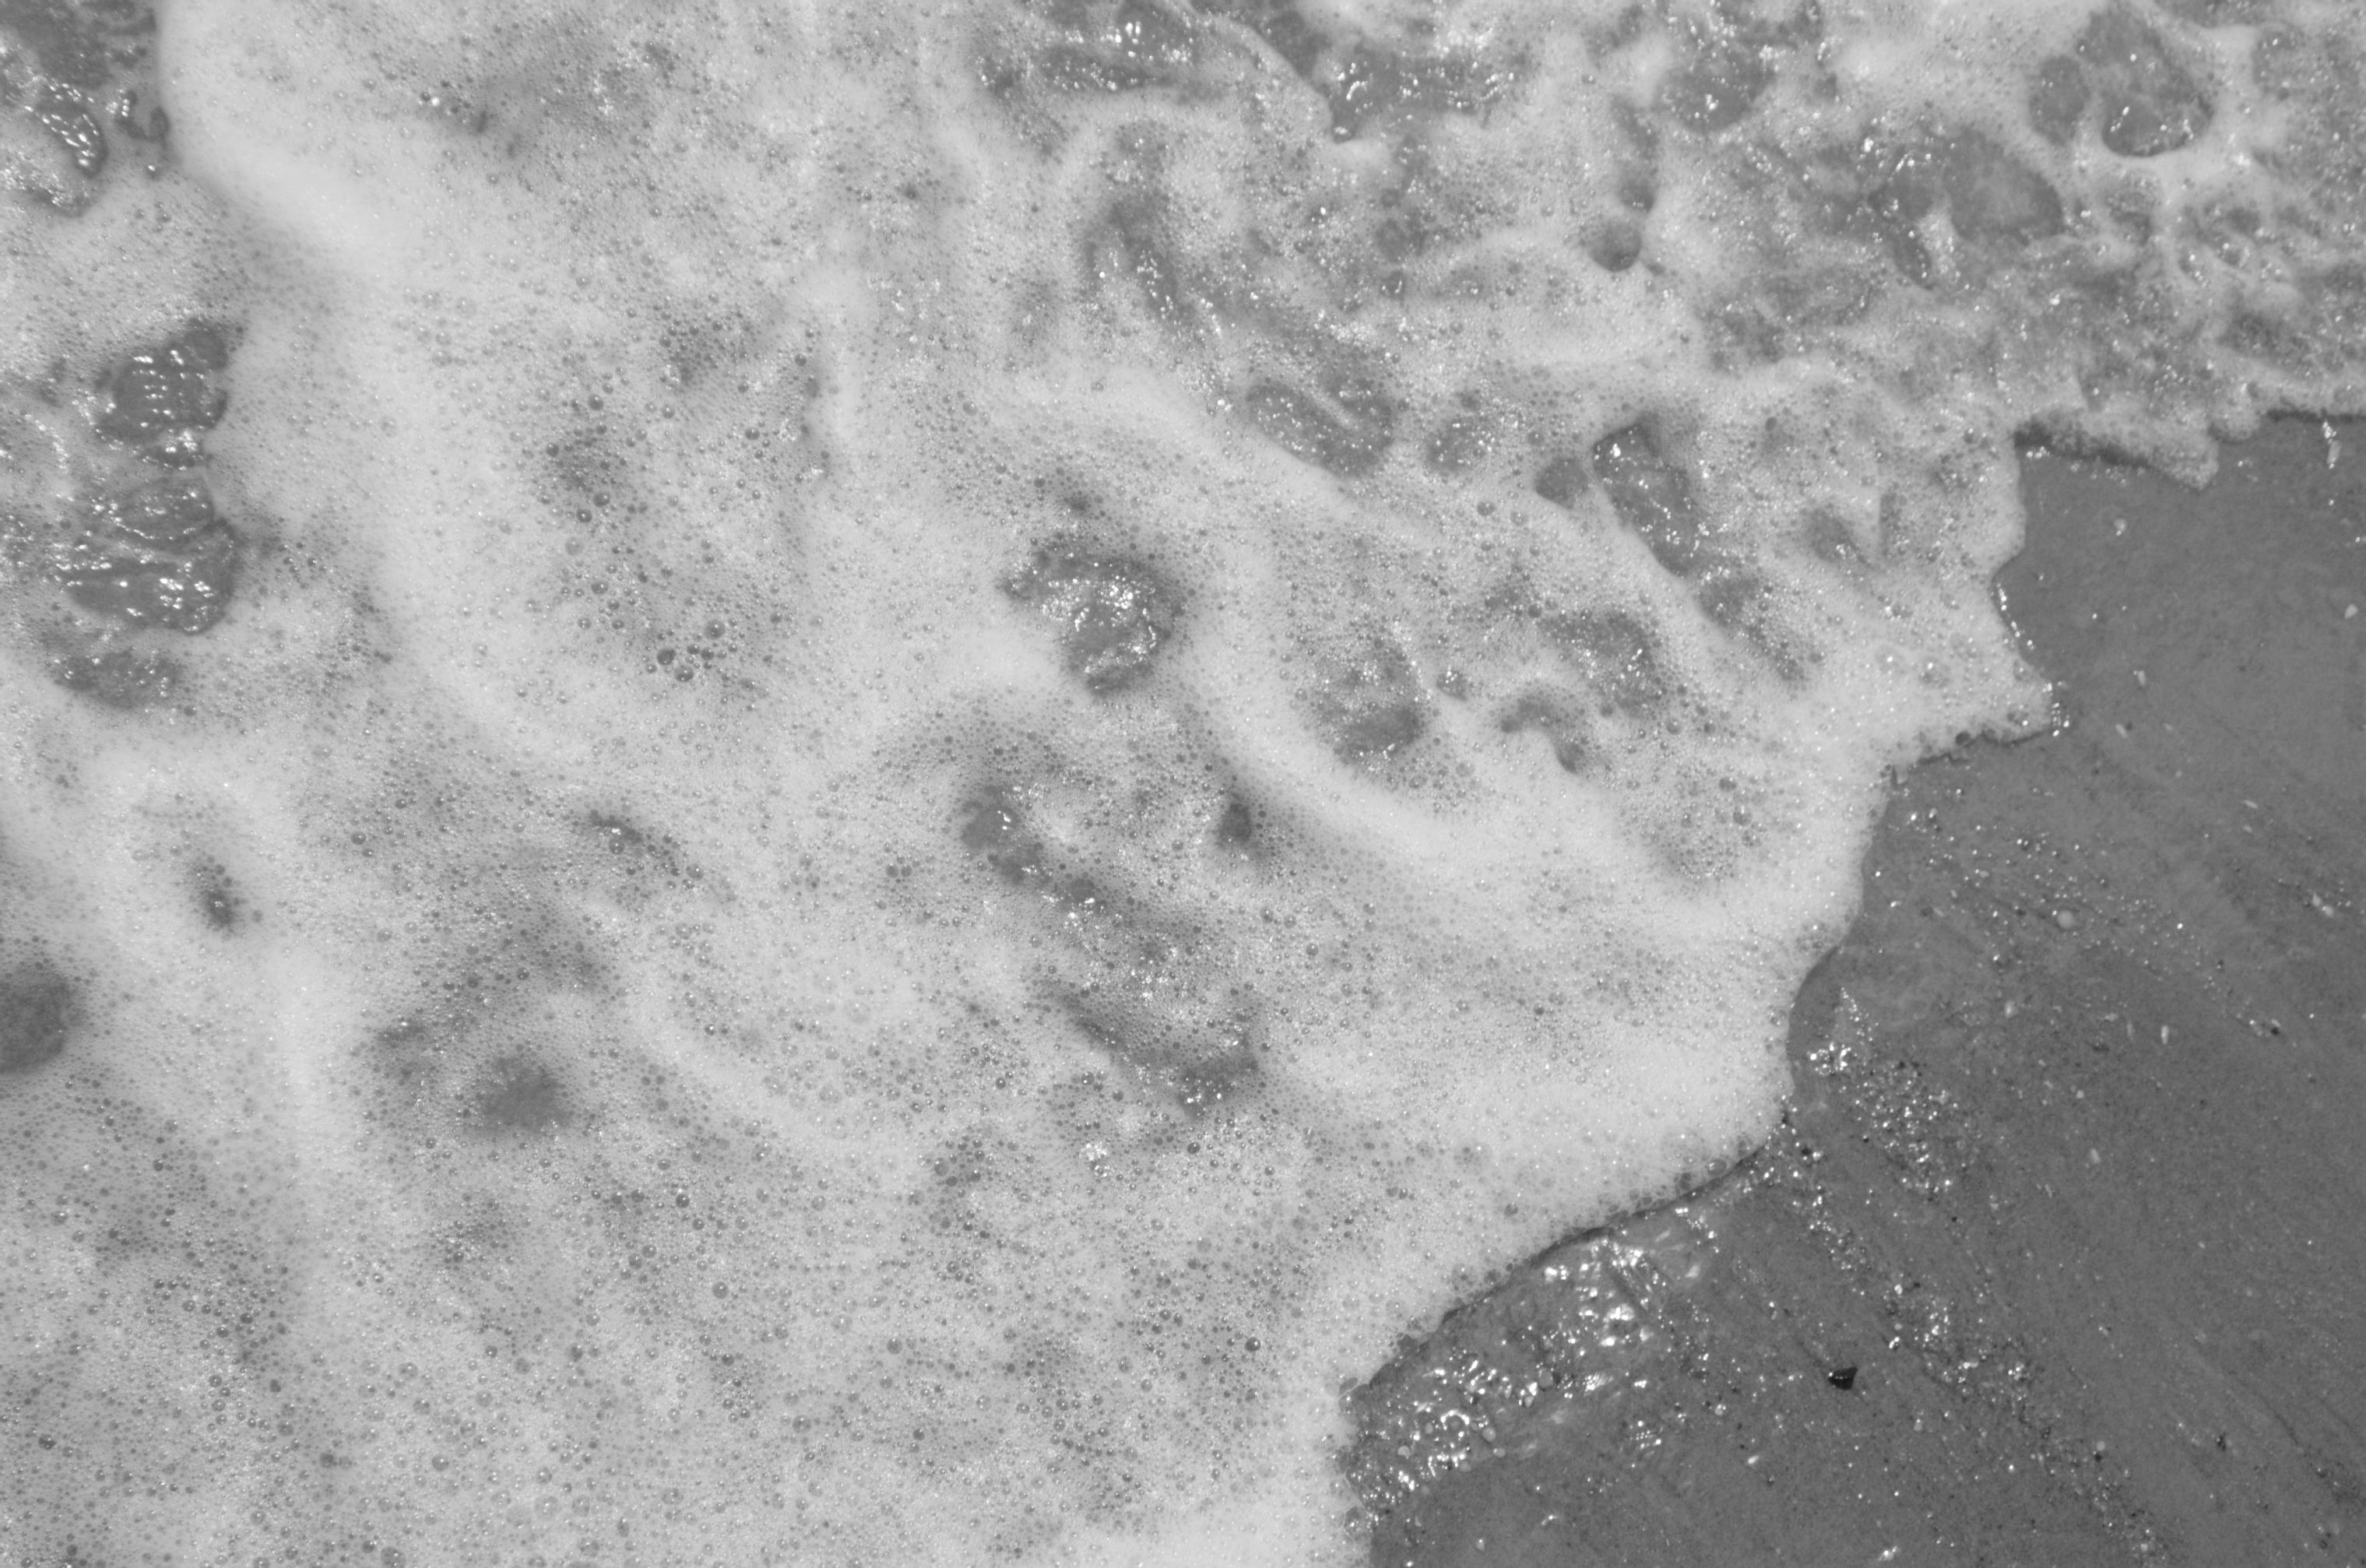 Moment on a wave - world in a moment, Beach, Blackandwhite, B&w, Detail, HQ Photo